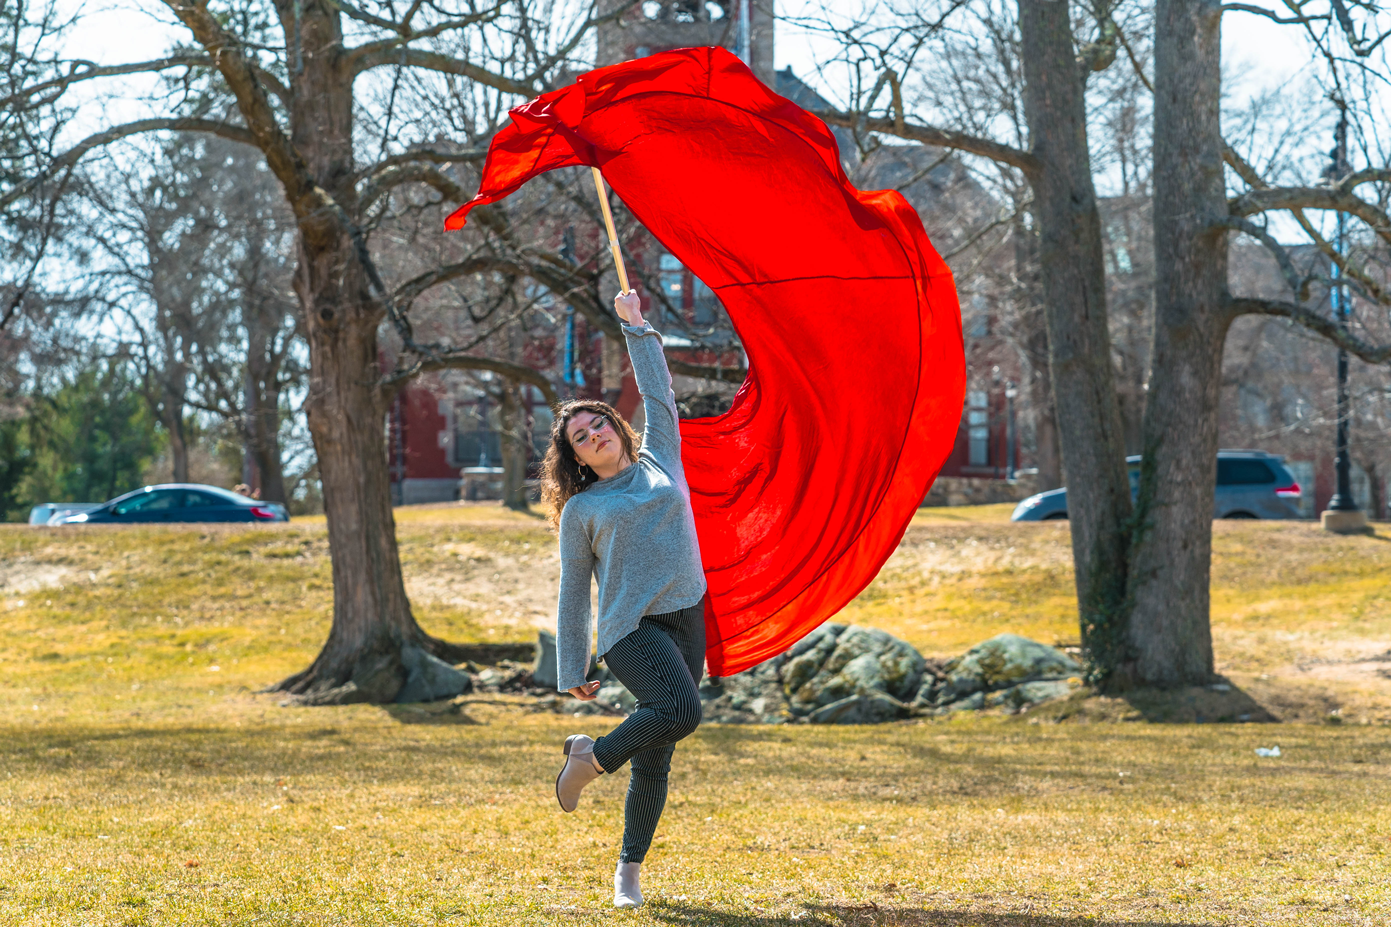 A student swinging a large red color guard flag